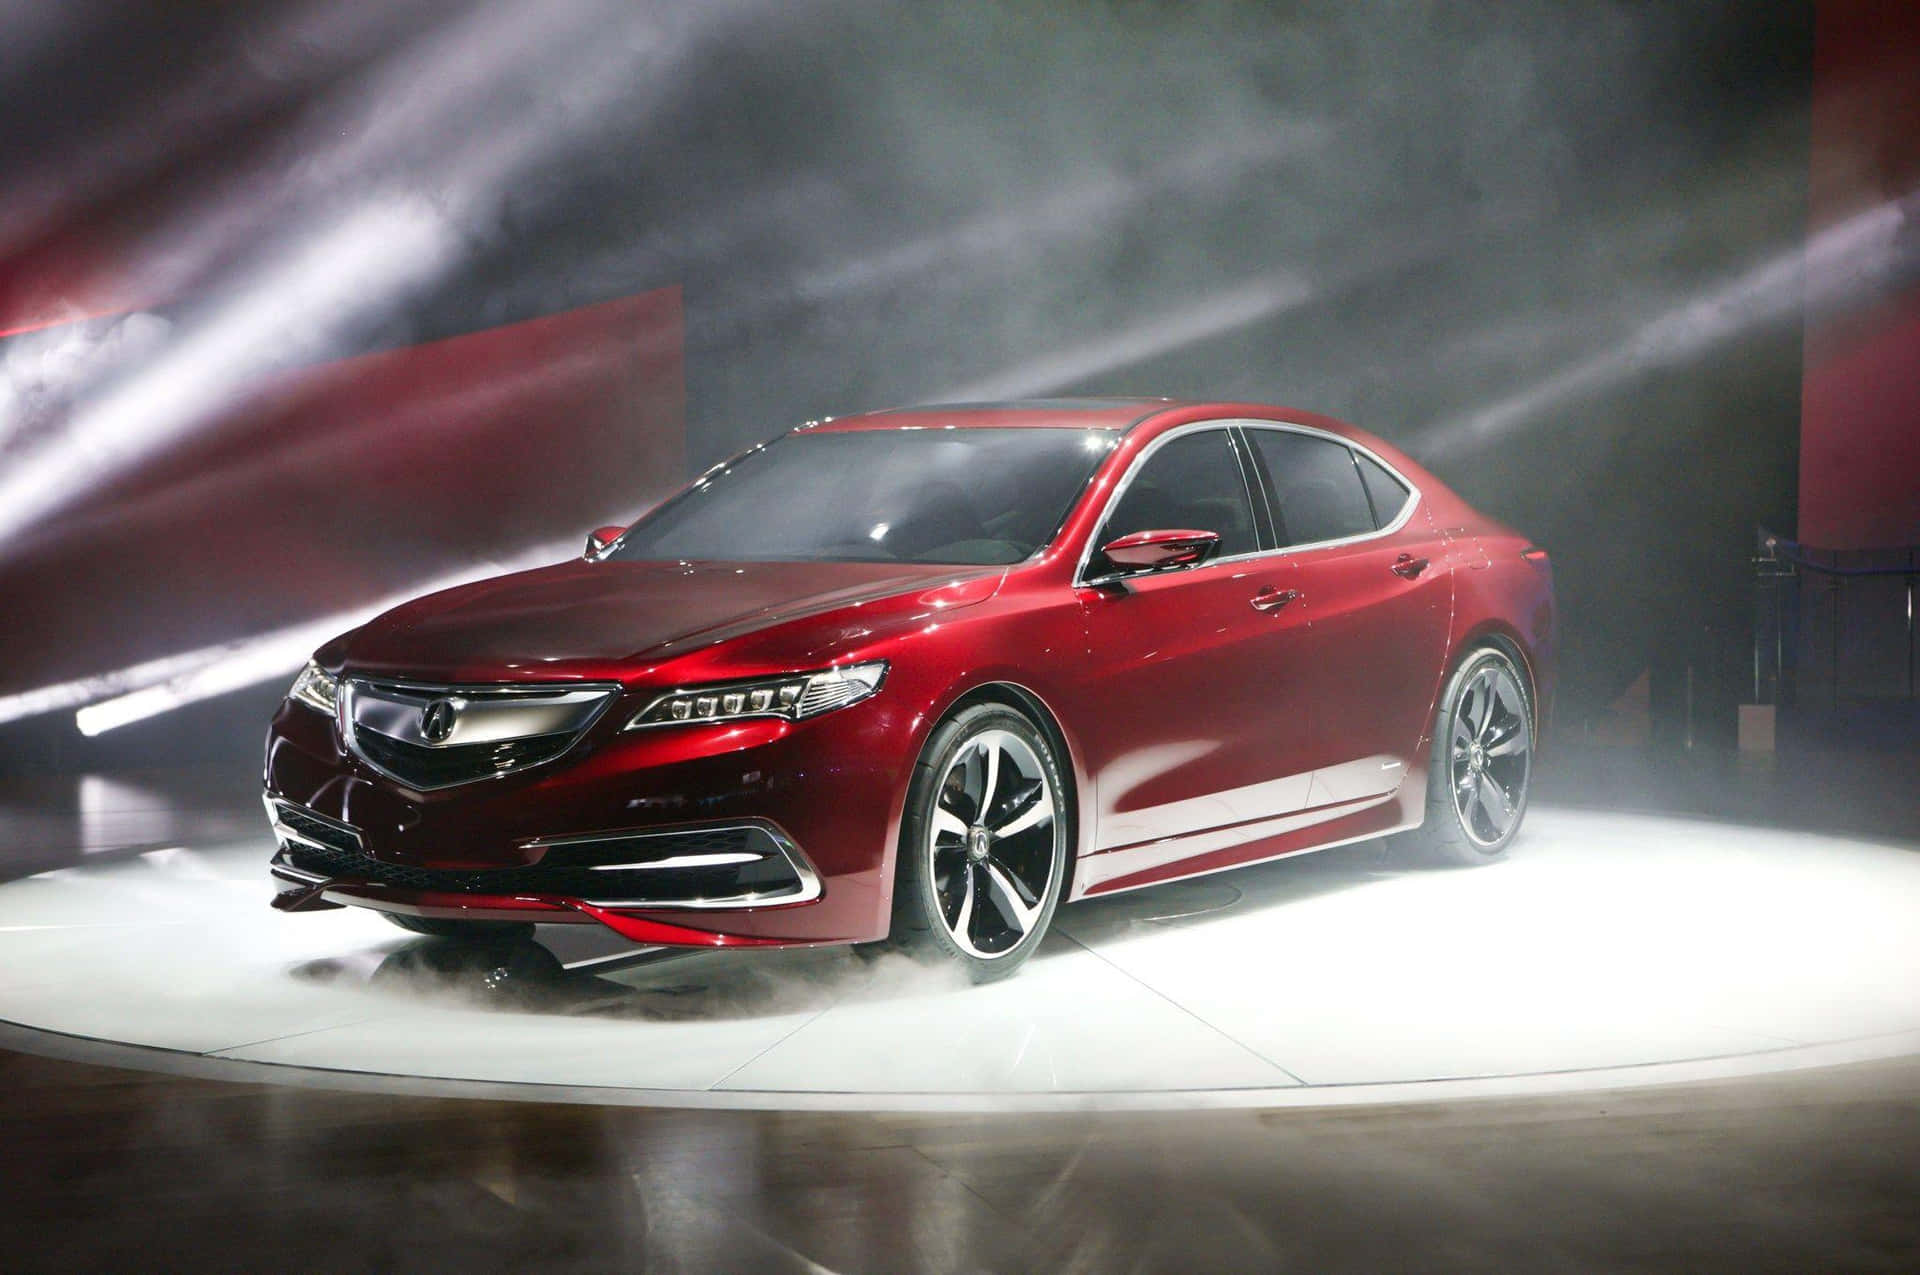 Stunning Acura TLX cruising down the road Wallpaper